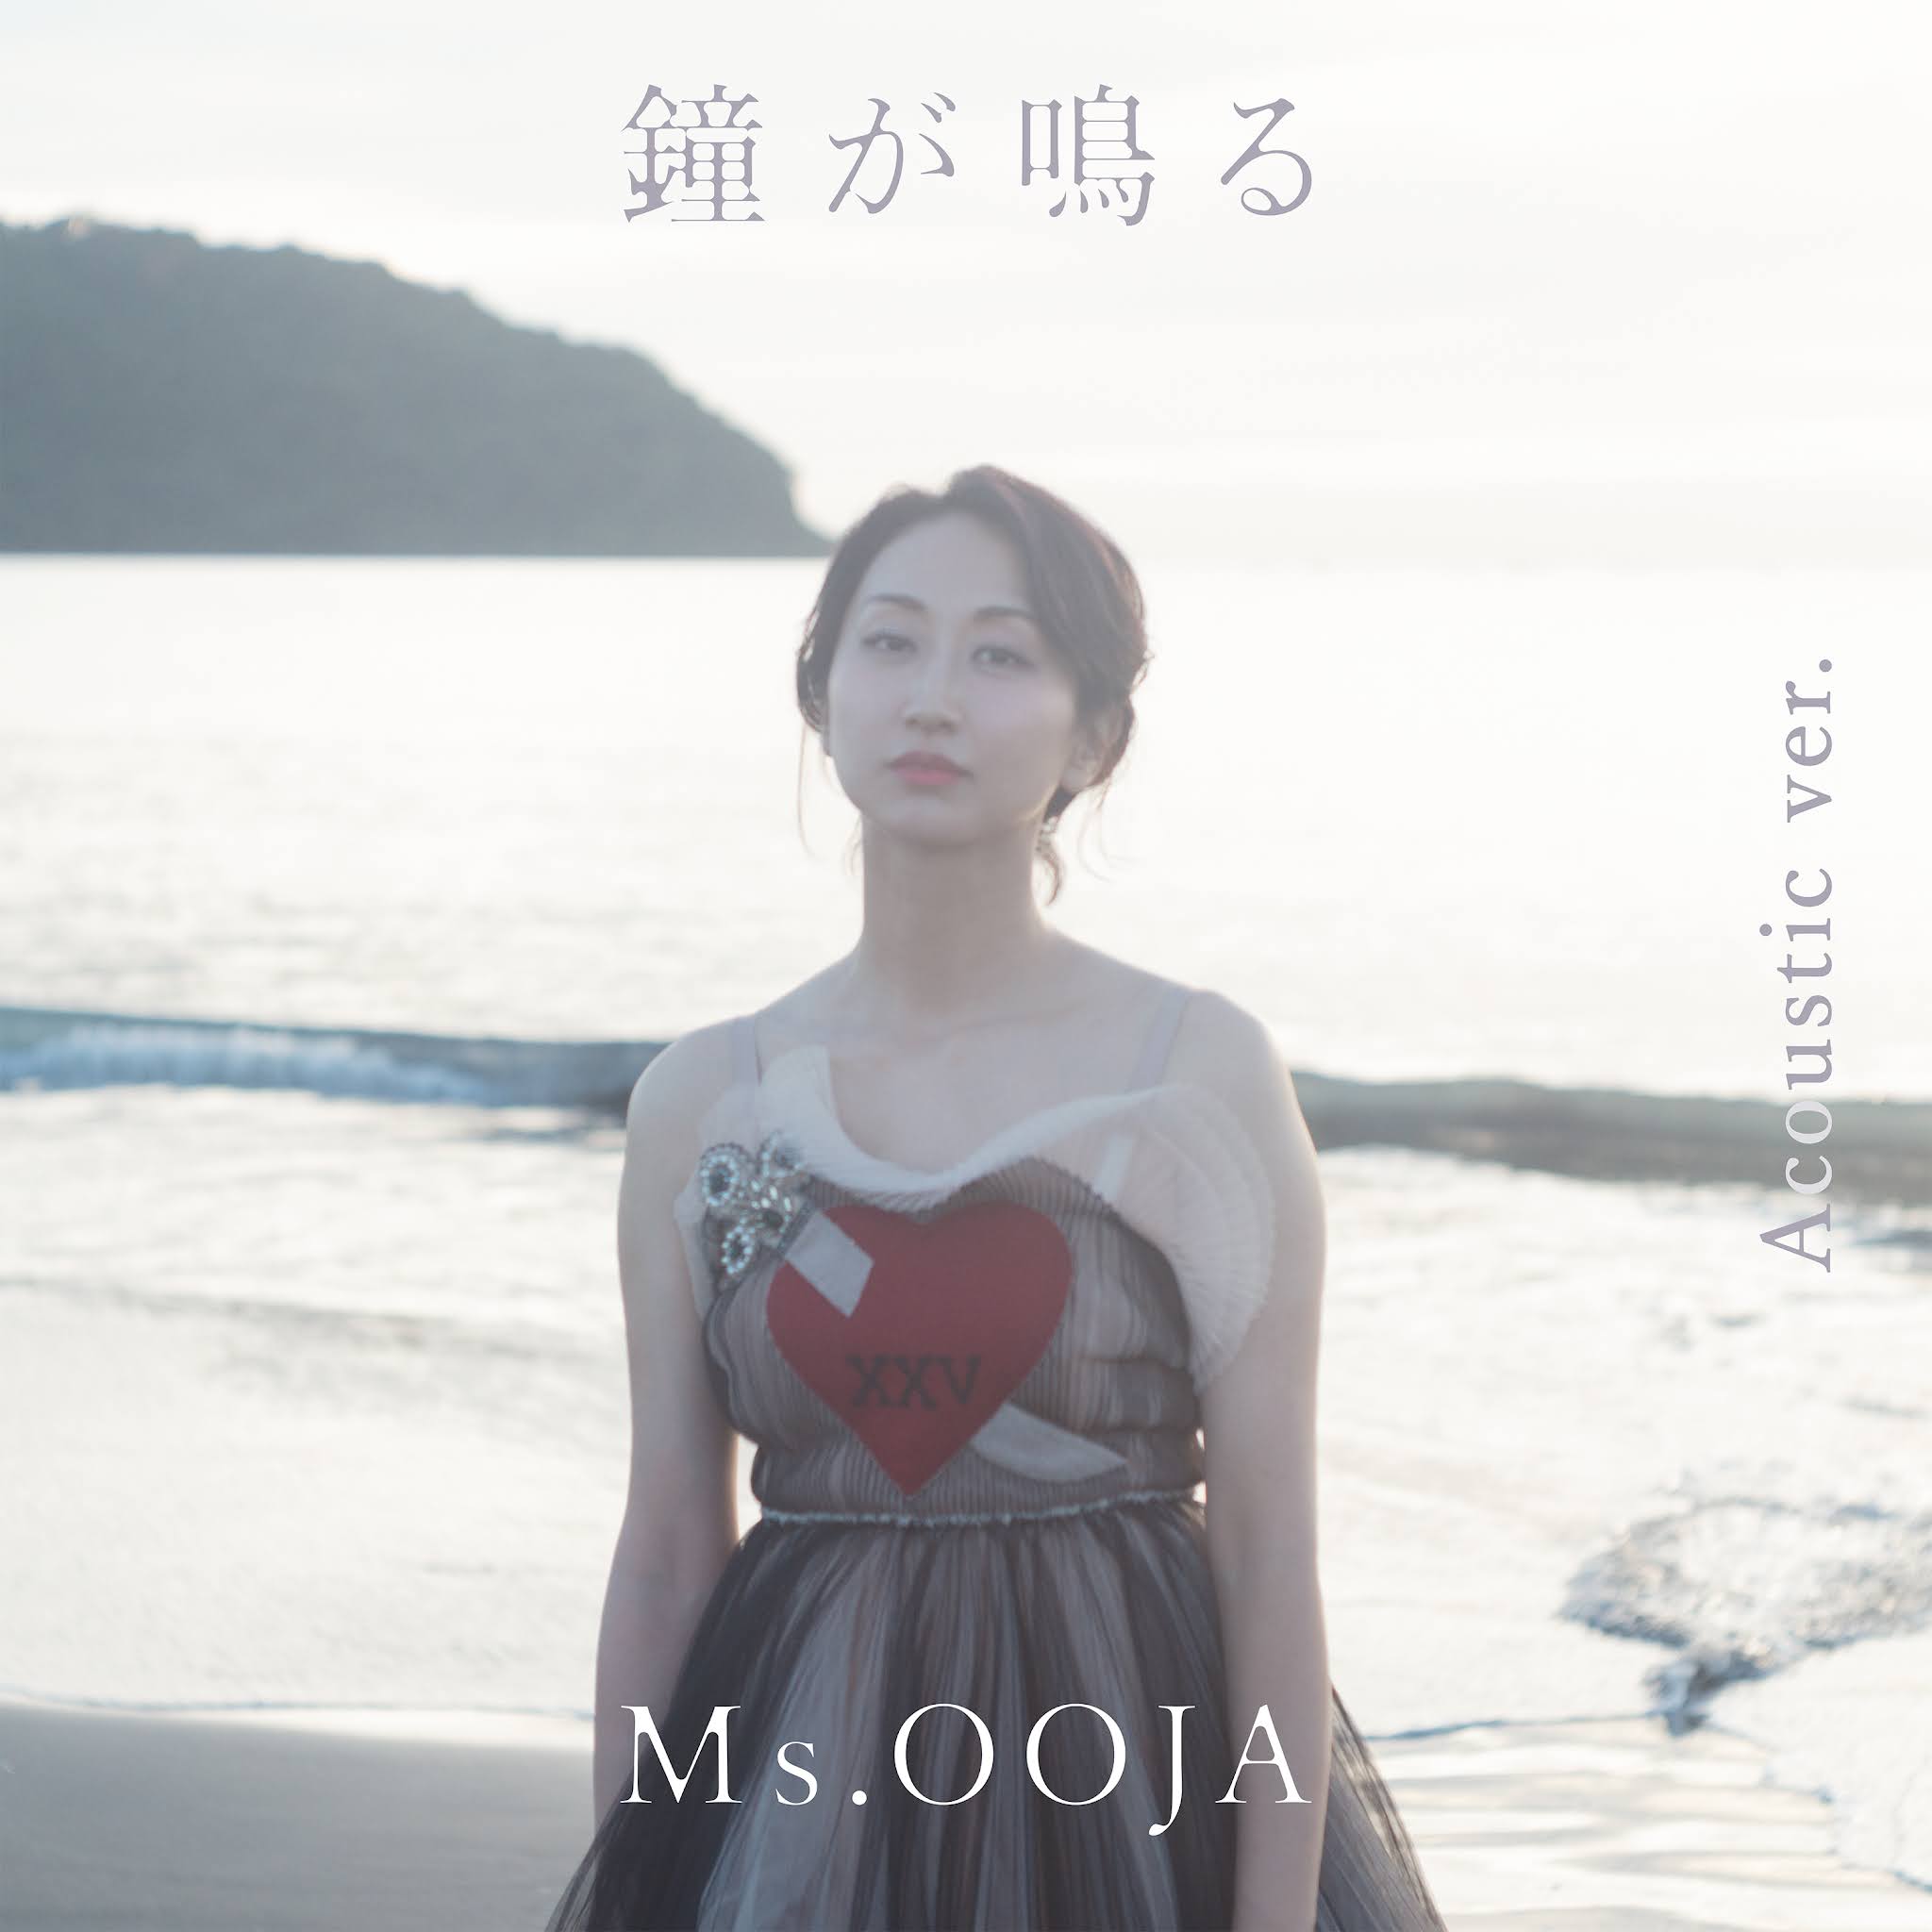 Ms.OOJA - 鐘が鳴る (Acoustic ver.)